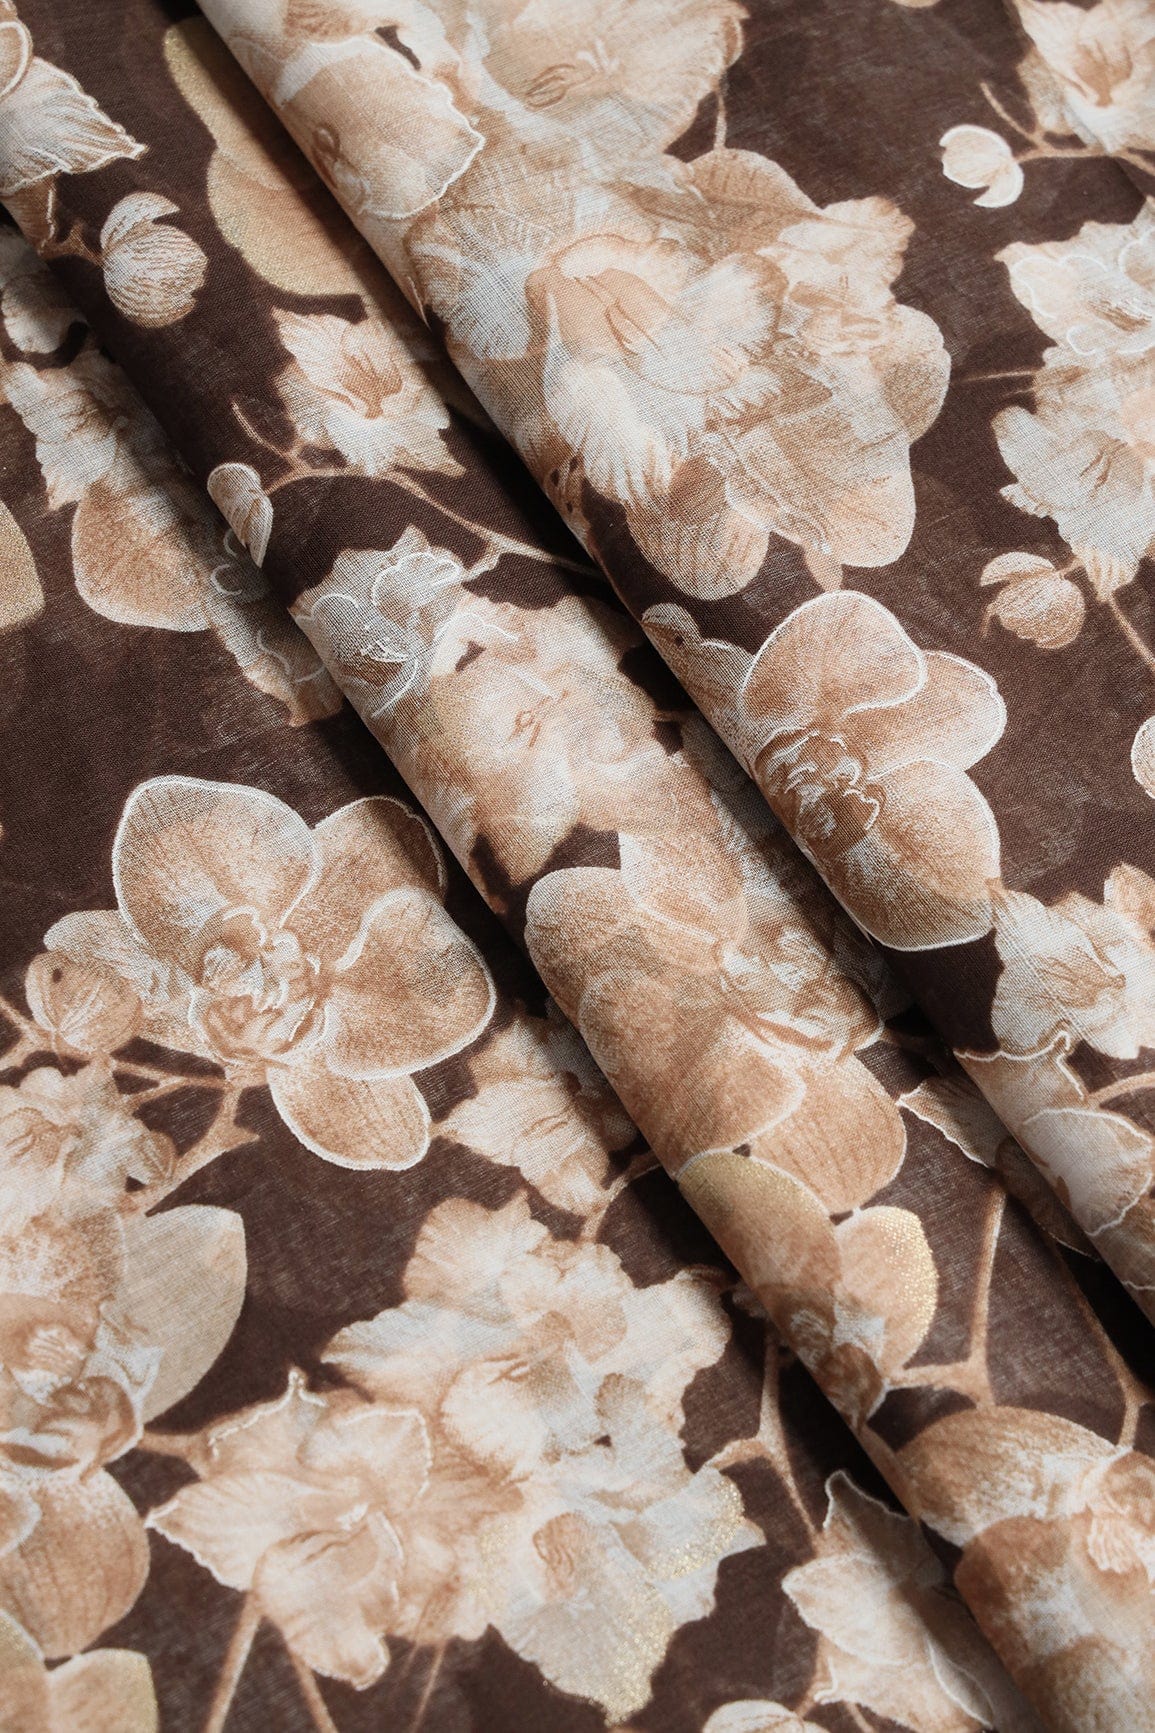 doeraa Prints White And Beige Floral Foil Print On Brown Pure Mul Cotton Fabric